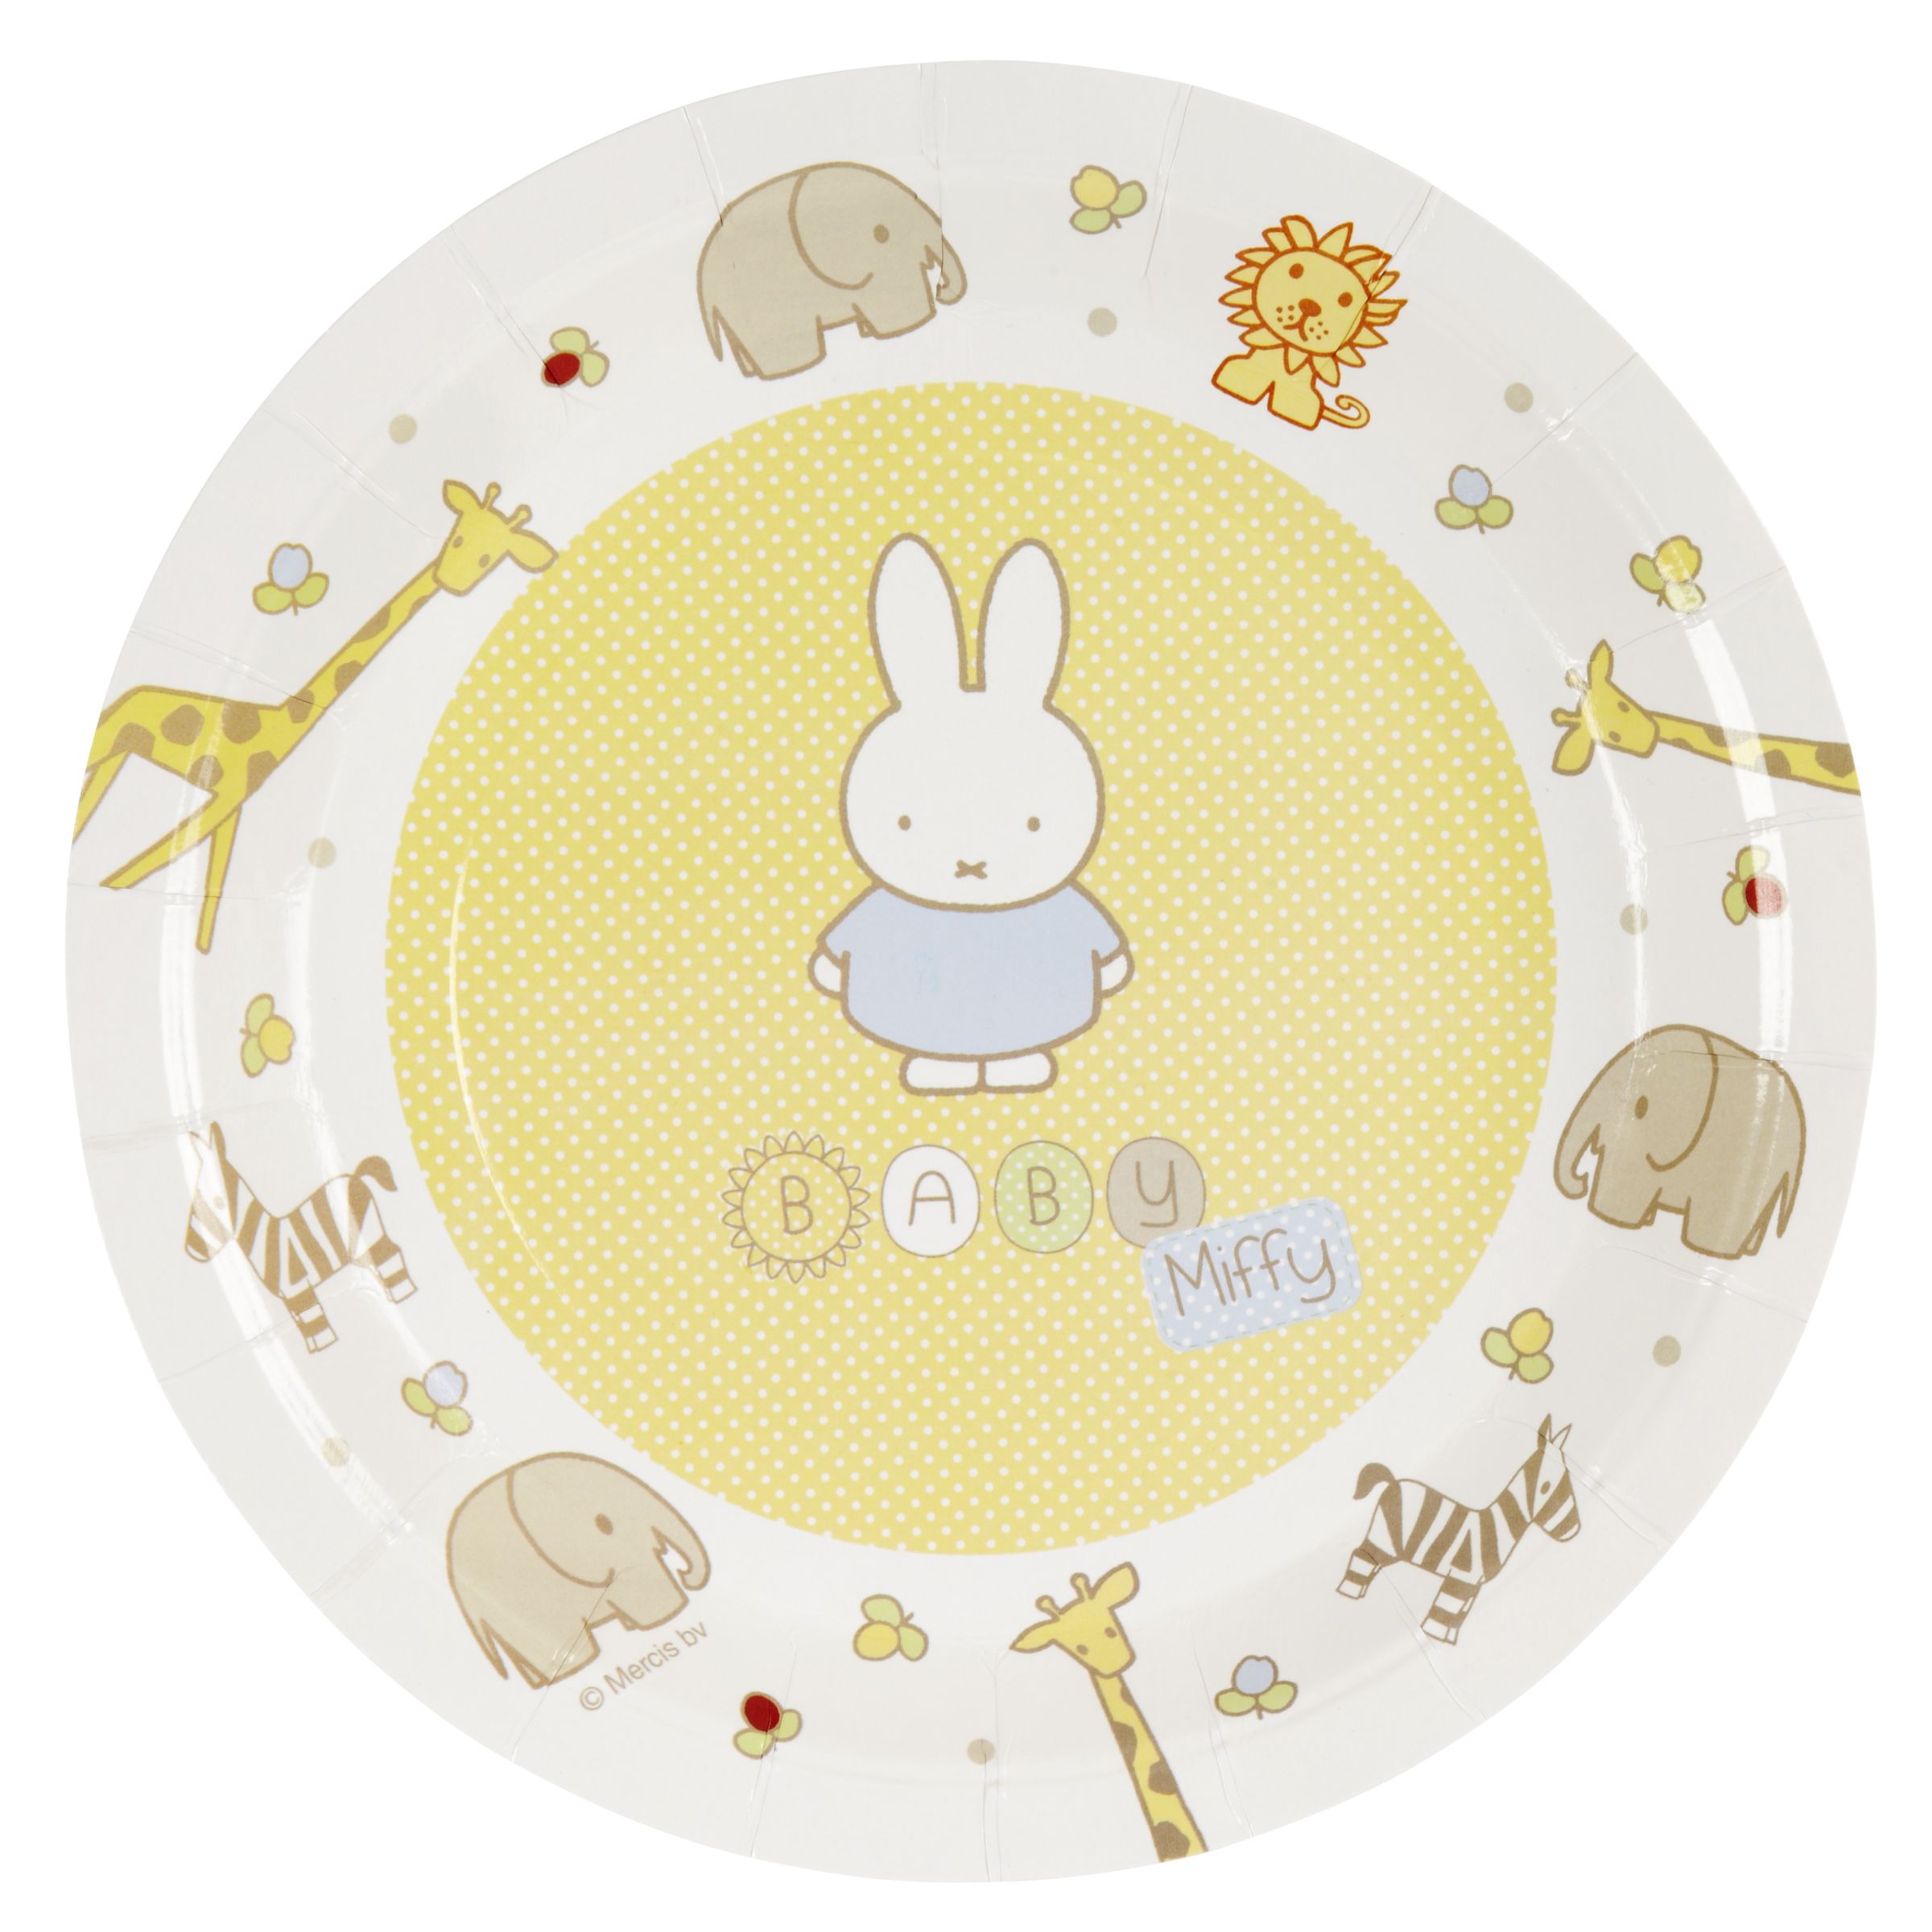 Miffy Plates, Multi, Pack Of 8